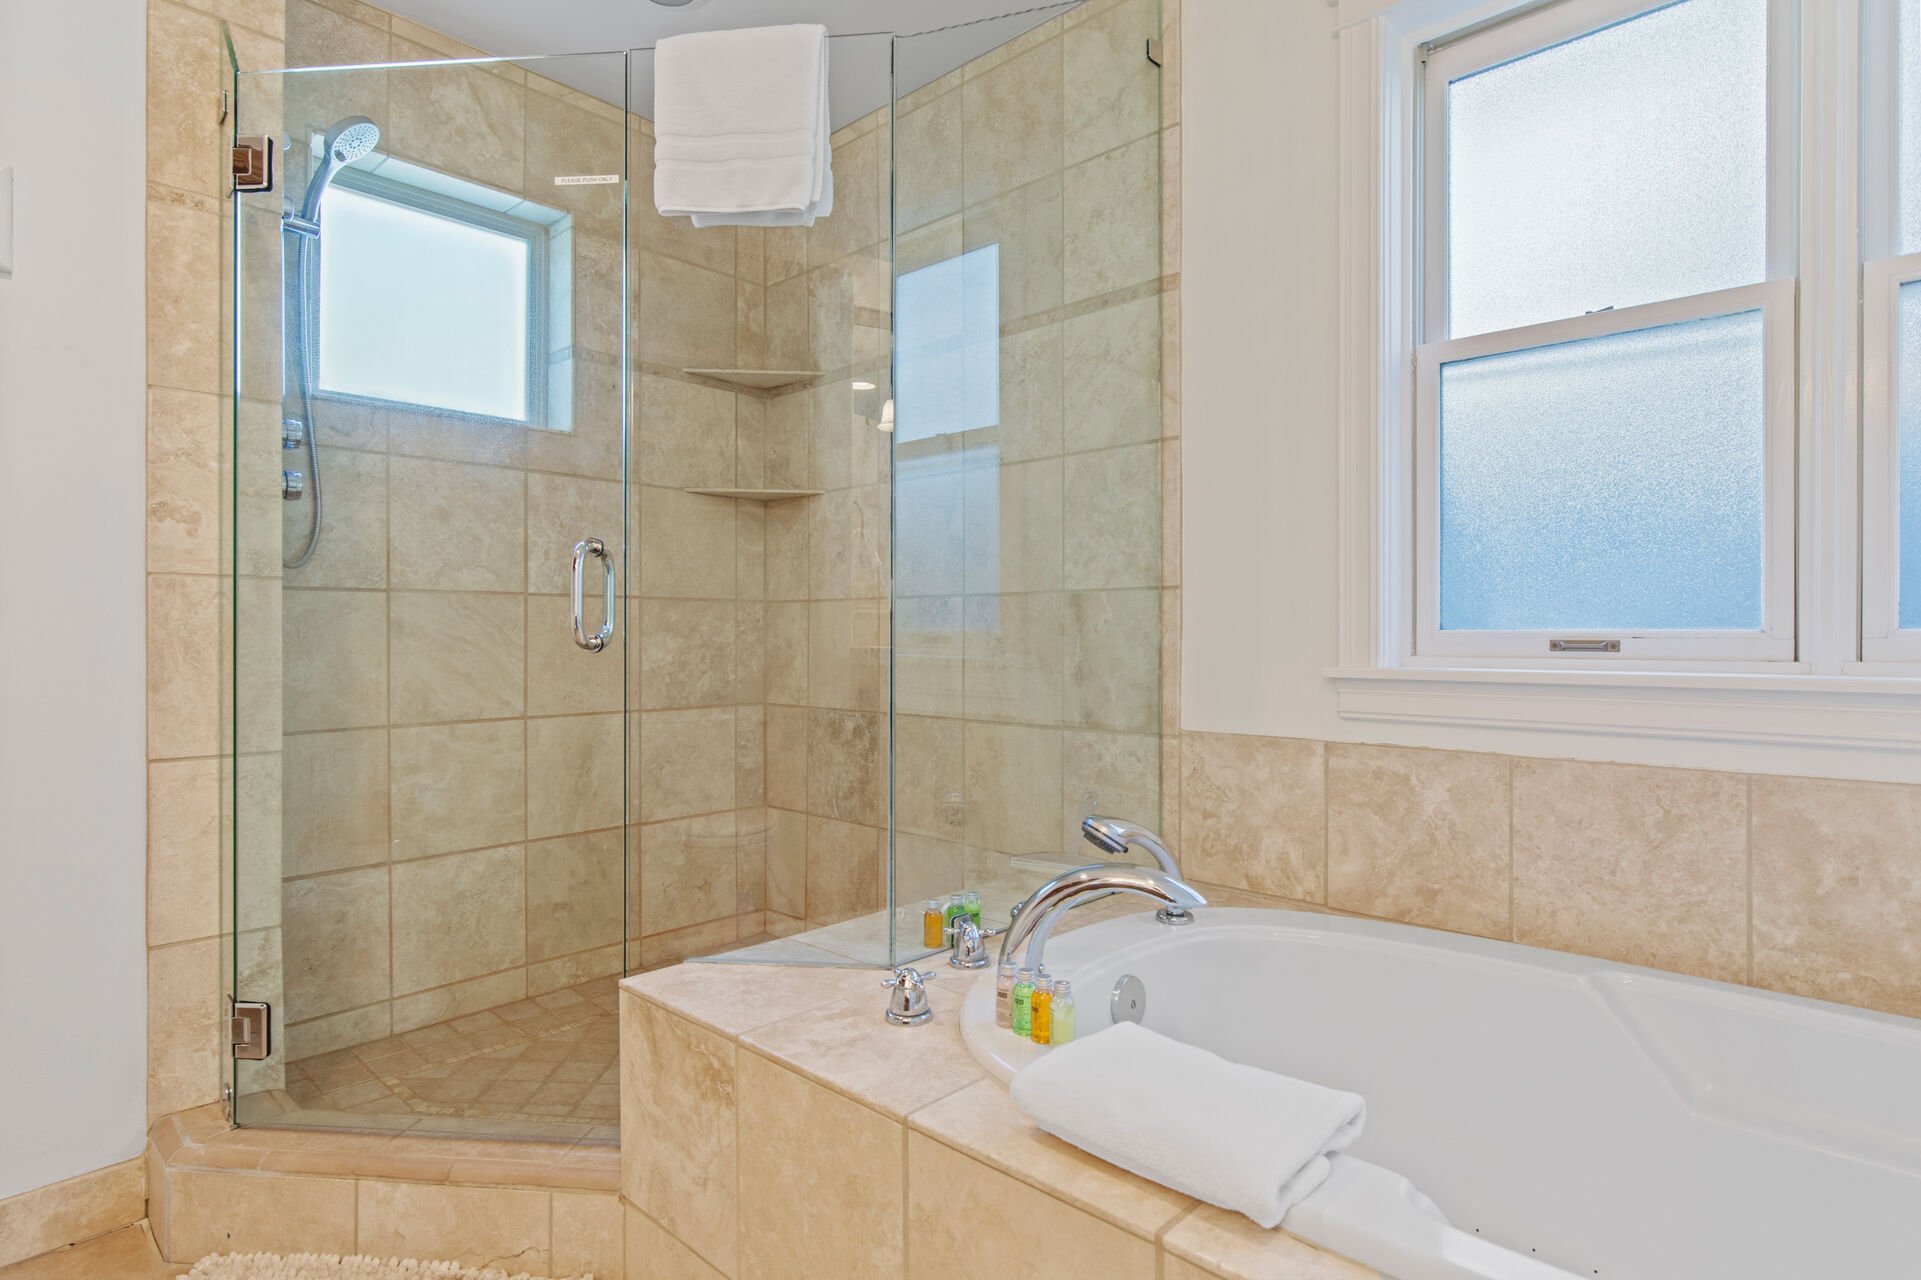 Master Bathroom with over-sized tile shower, jetted tub, and dual vanities